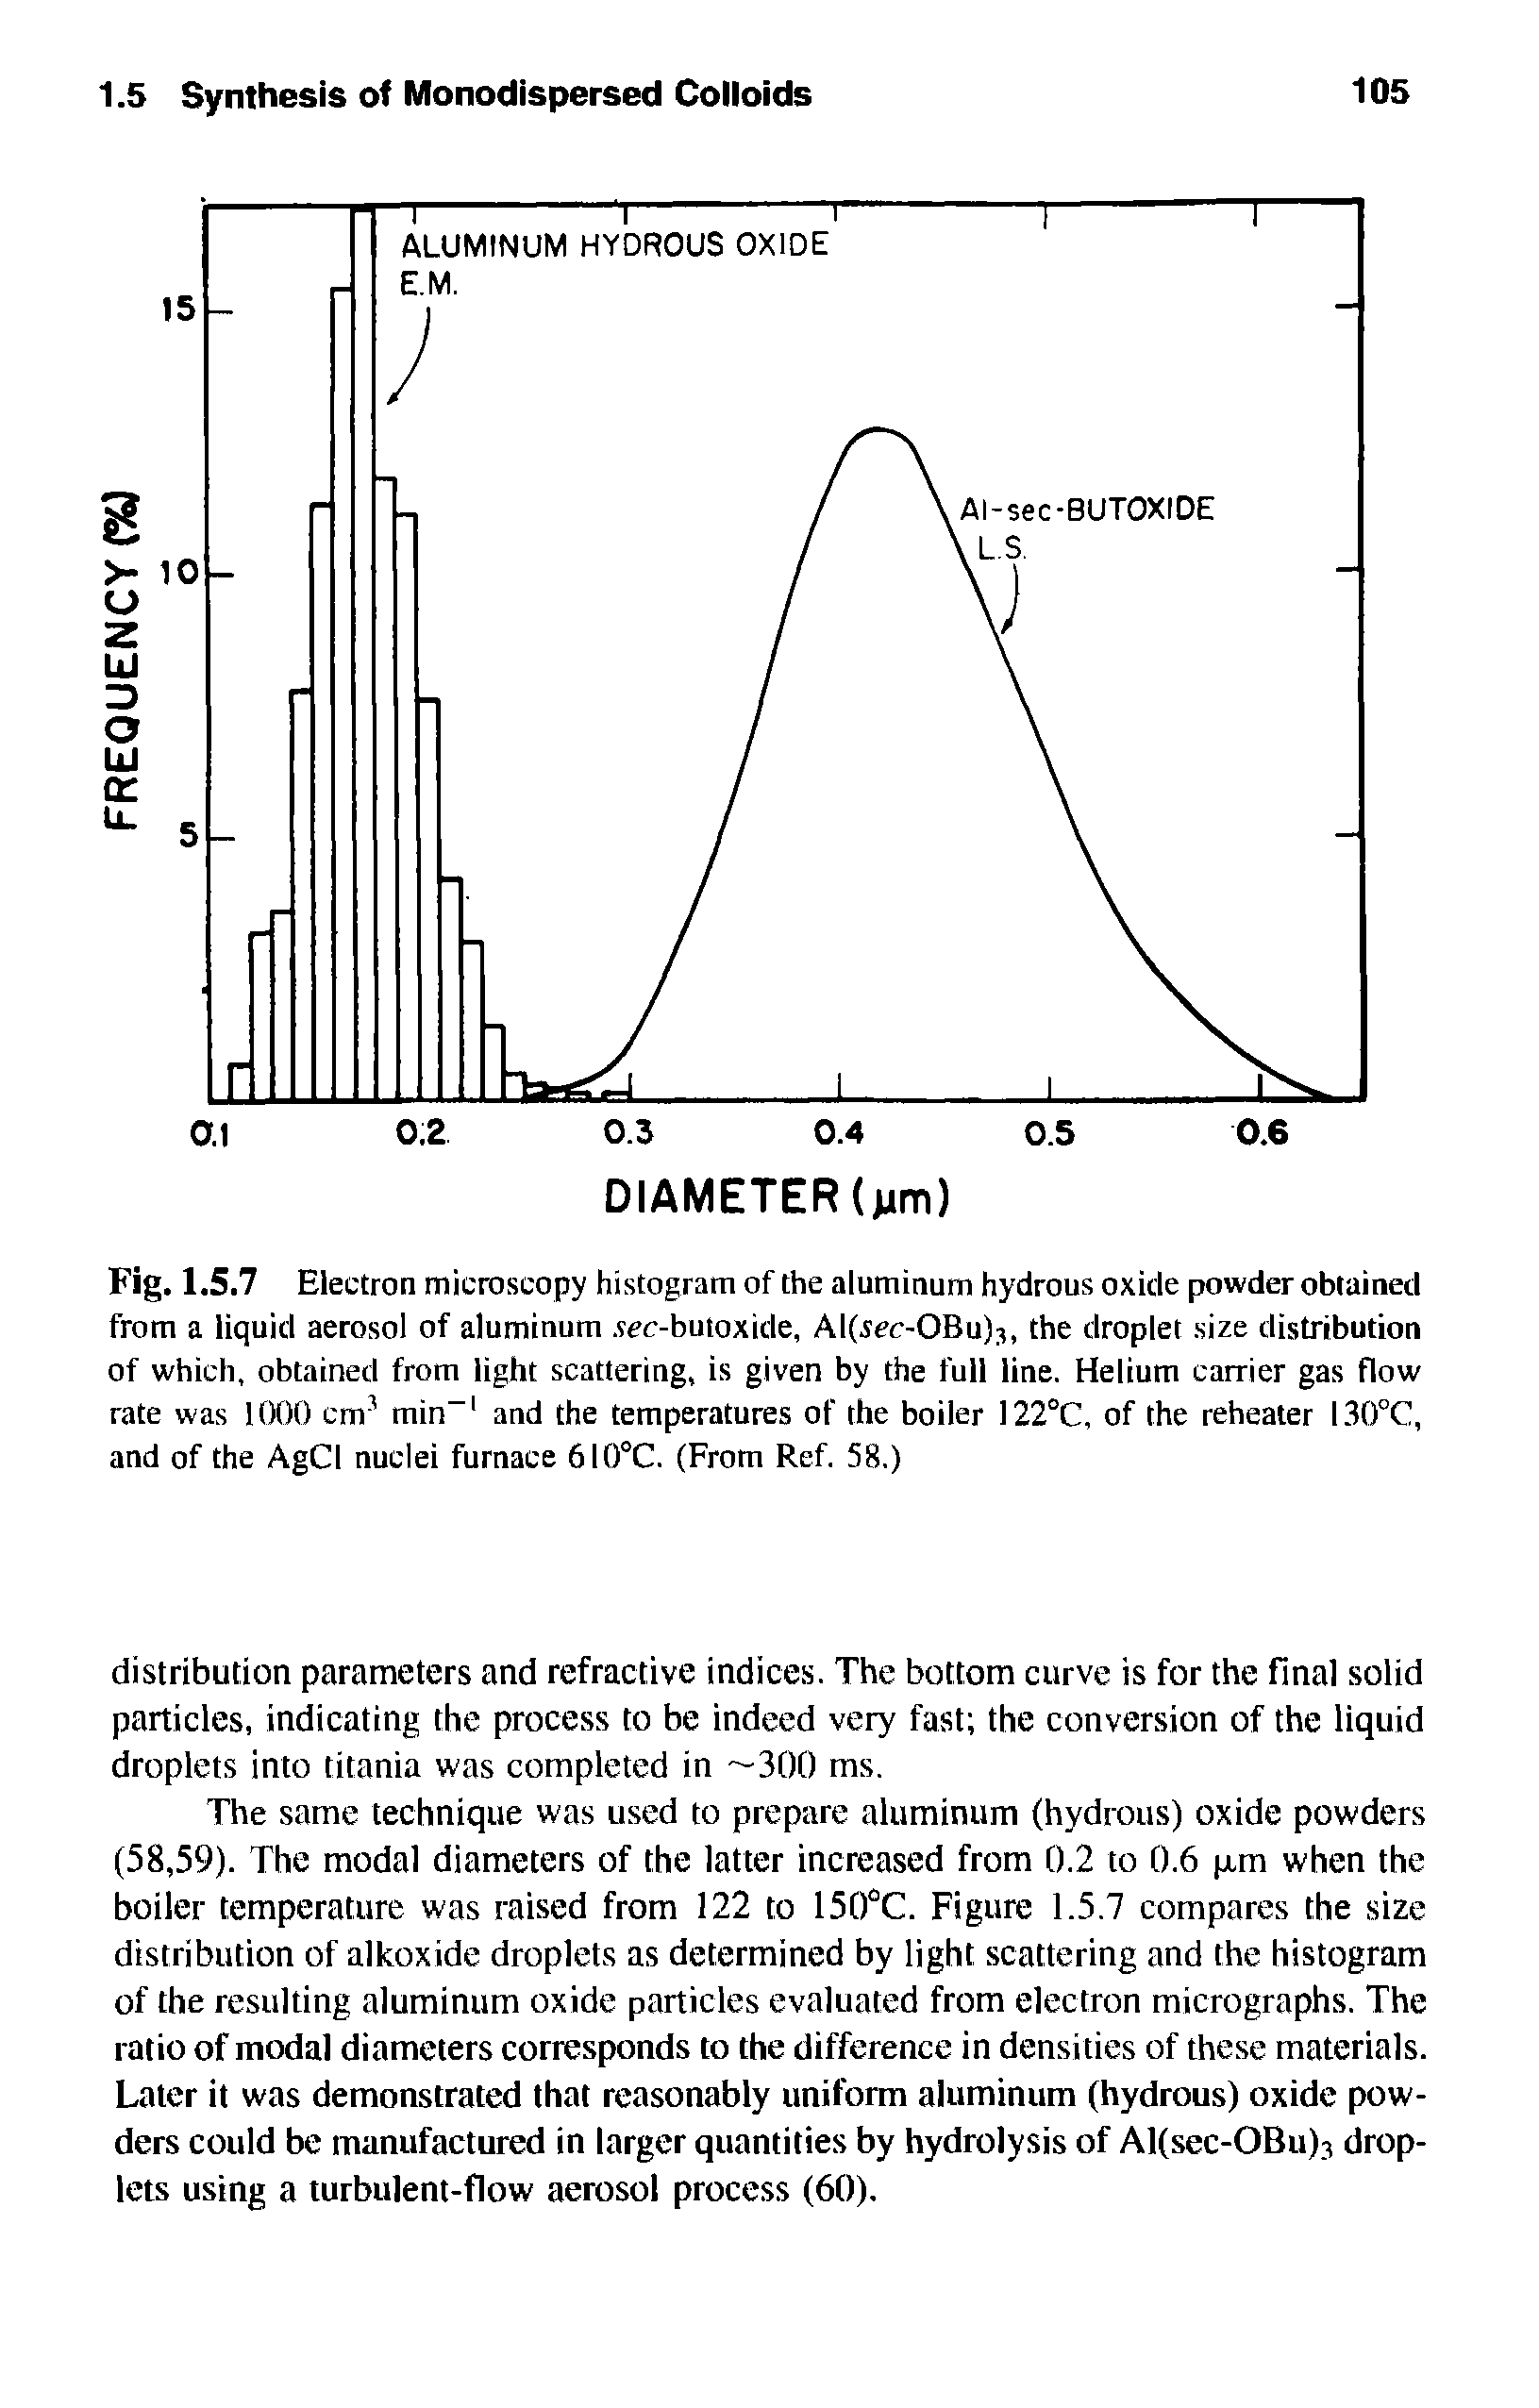 Fig. 1.5.7 Electron microscopy histogram of the aluminum hydrous oxide powder obtained from a liquid aerosol of aluminum. sec-butoxide, AI(.str-OBu)3, the droplet size distribution of which, obtained from light scattering, is given by the full line. Helium carrier gas flow rate was 1000 cm3 min-1 and the temperatures of the boiler 122°C, of the reheater I30°C, and of the AgCl nuclei furnace 610°C. (From Ref. 58.)...